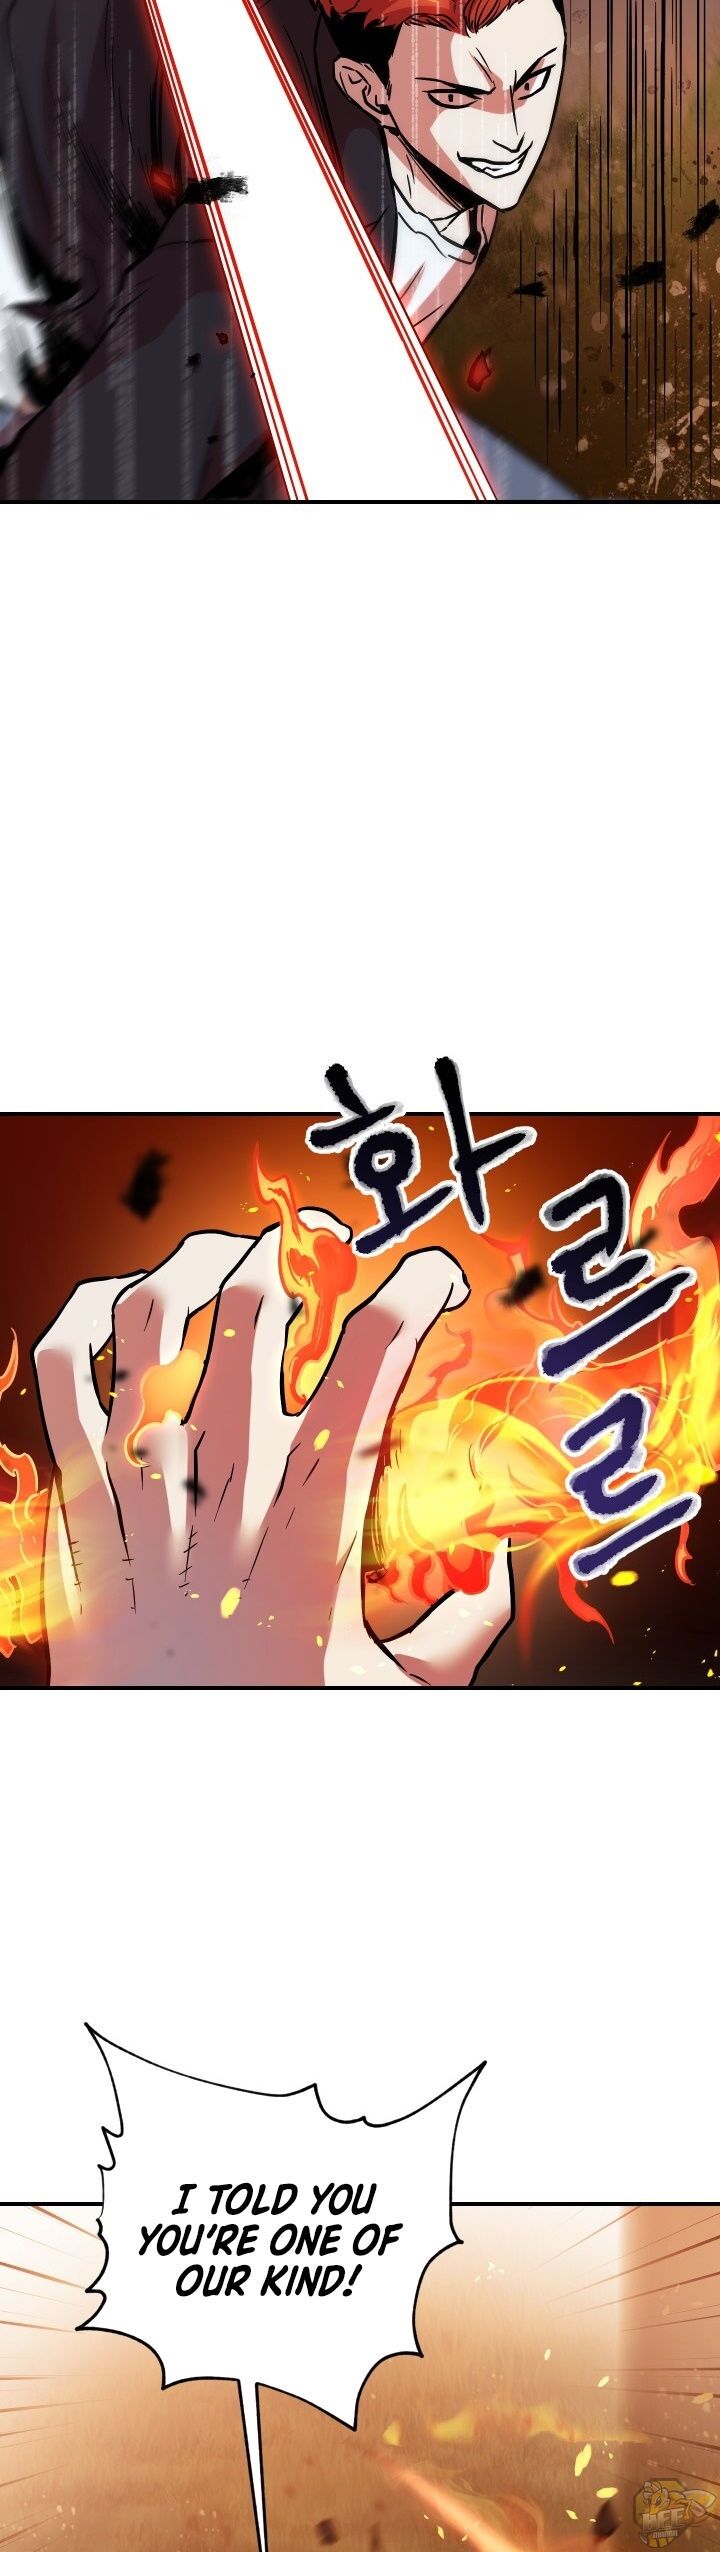 The Player That Can’t Level Up Chapter 34 - HolyManga.net